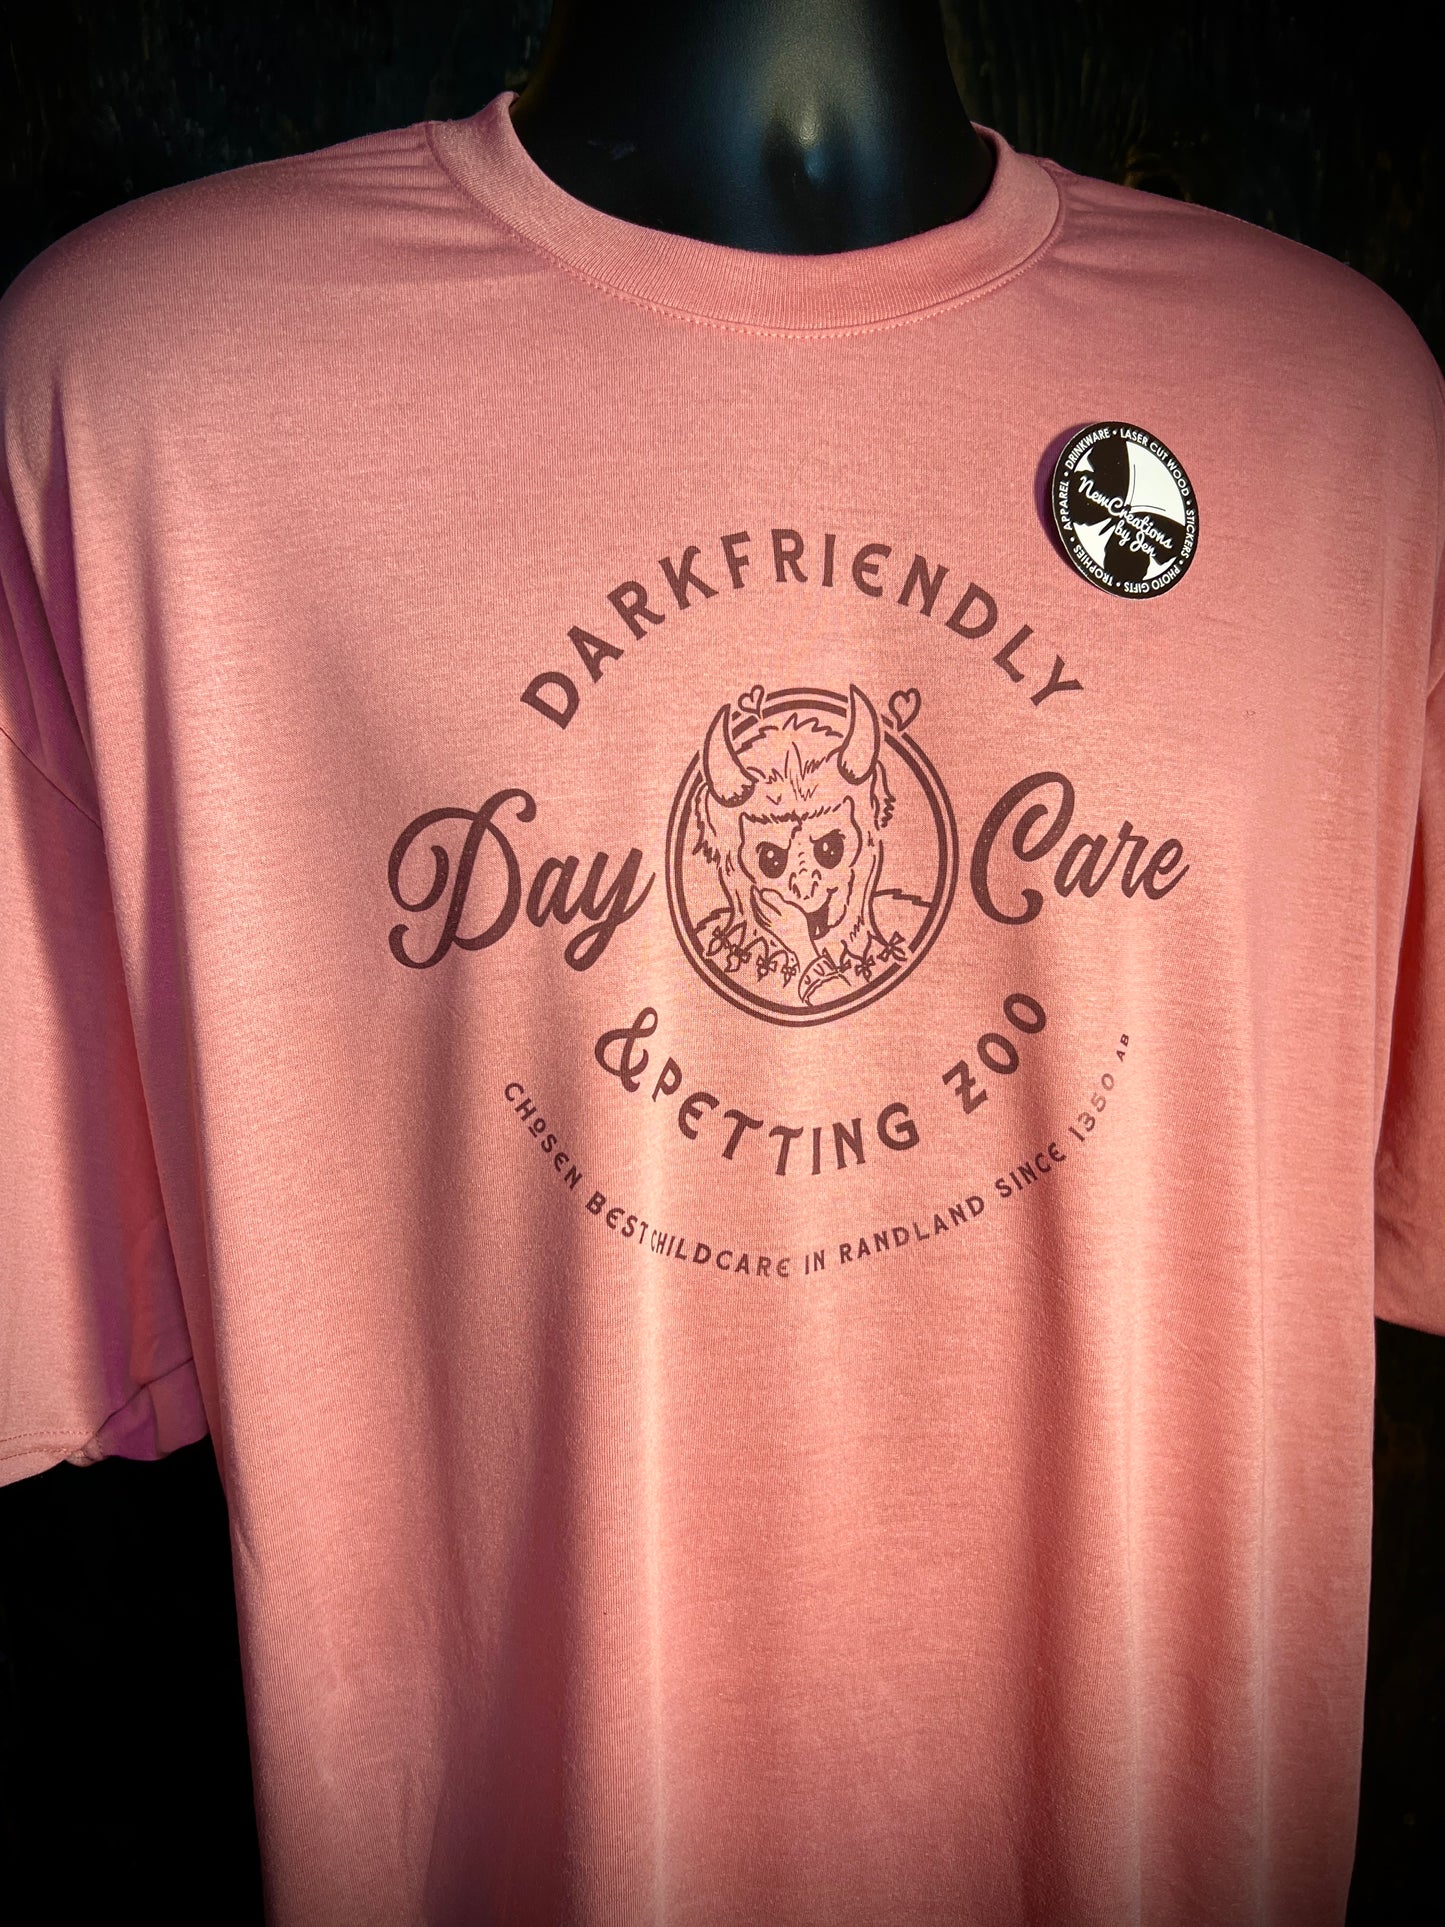 Darkfriendly Daycare & Petting Zoo - Wheel of Time Inspired  Souvenir Lightweight  Tees